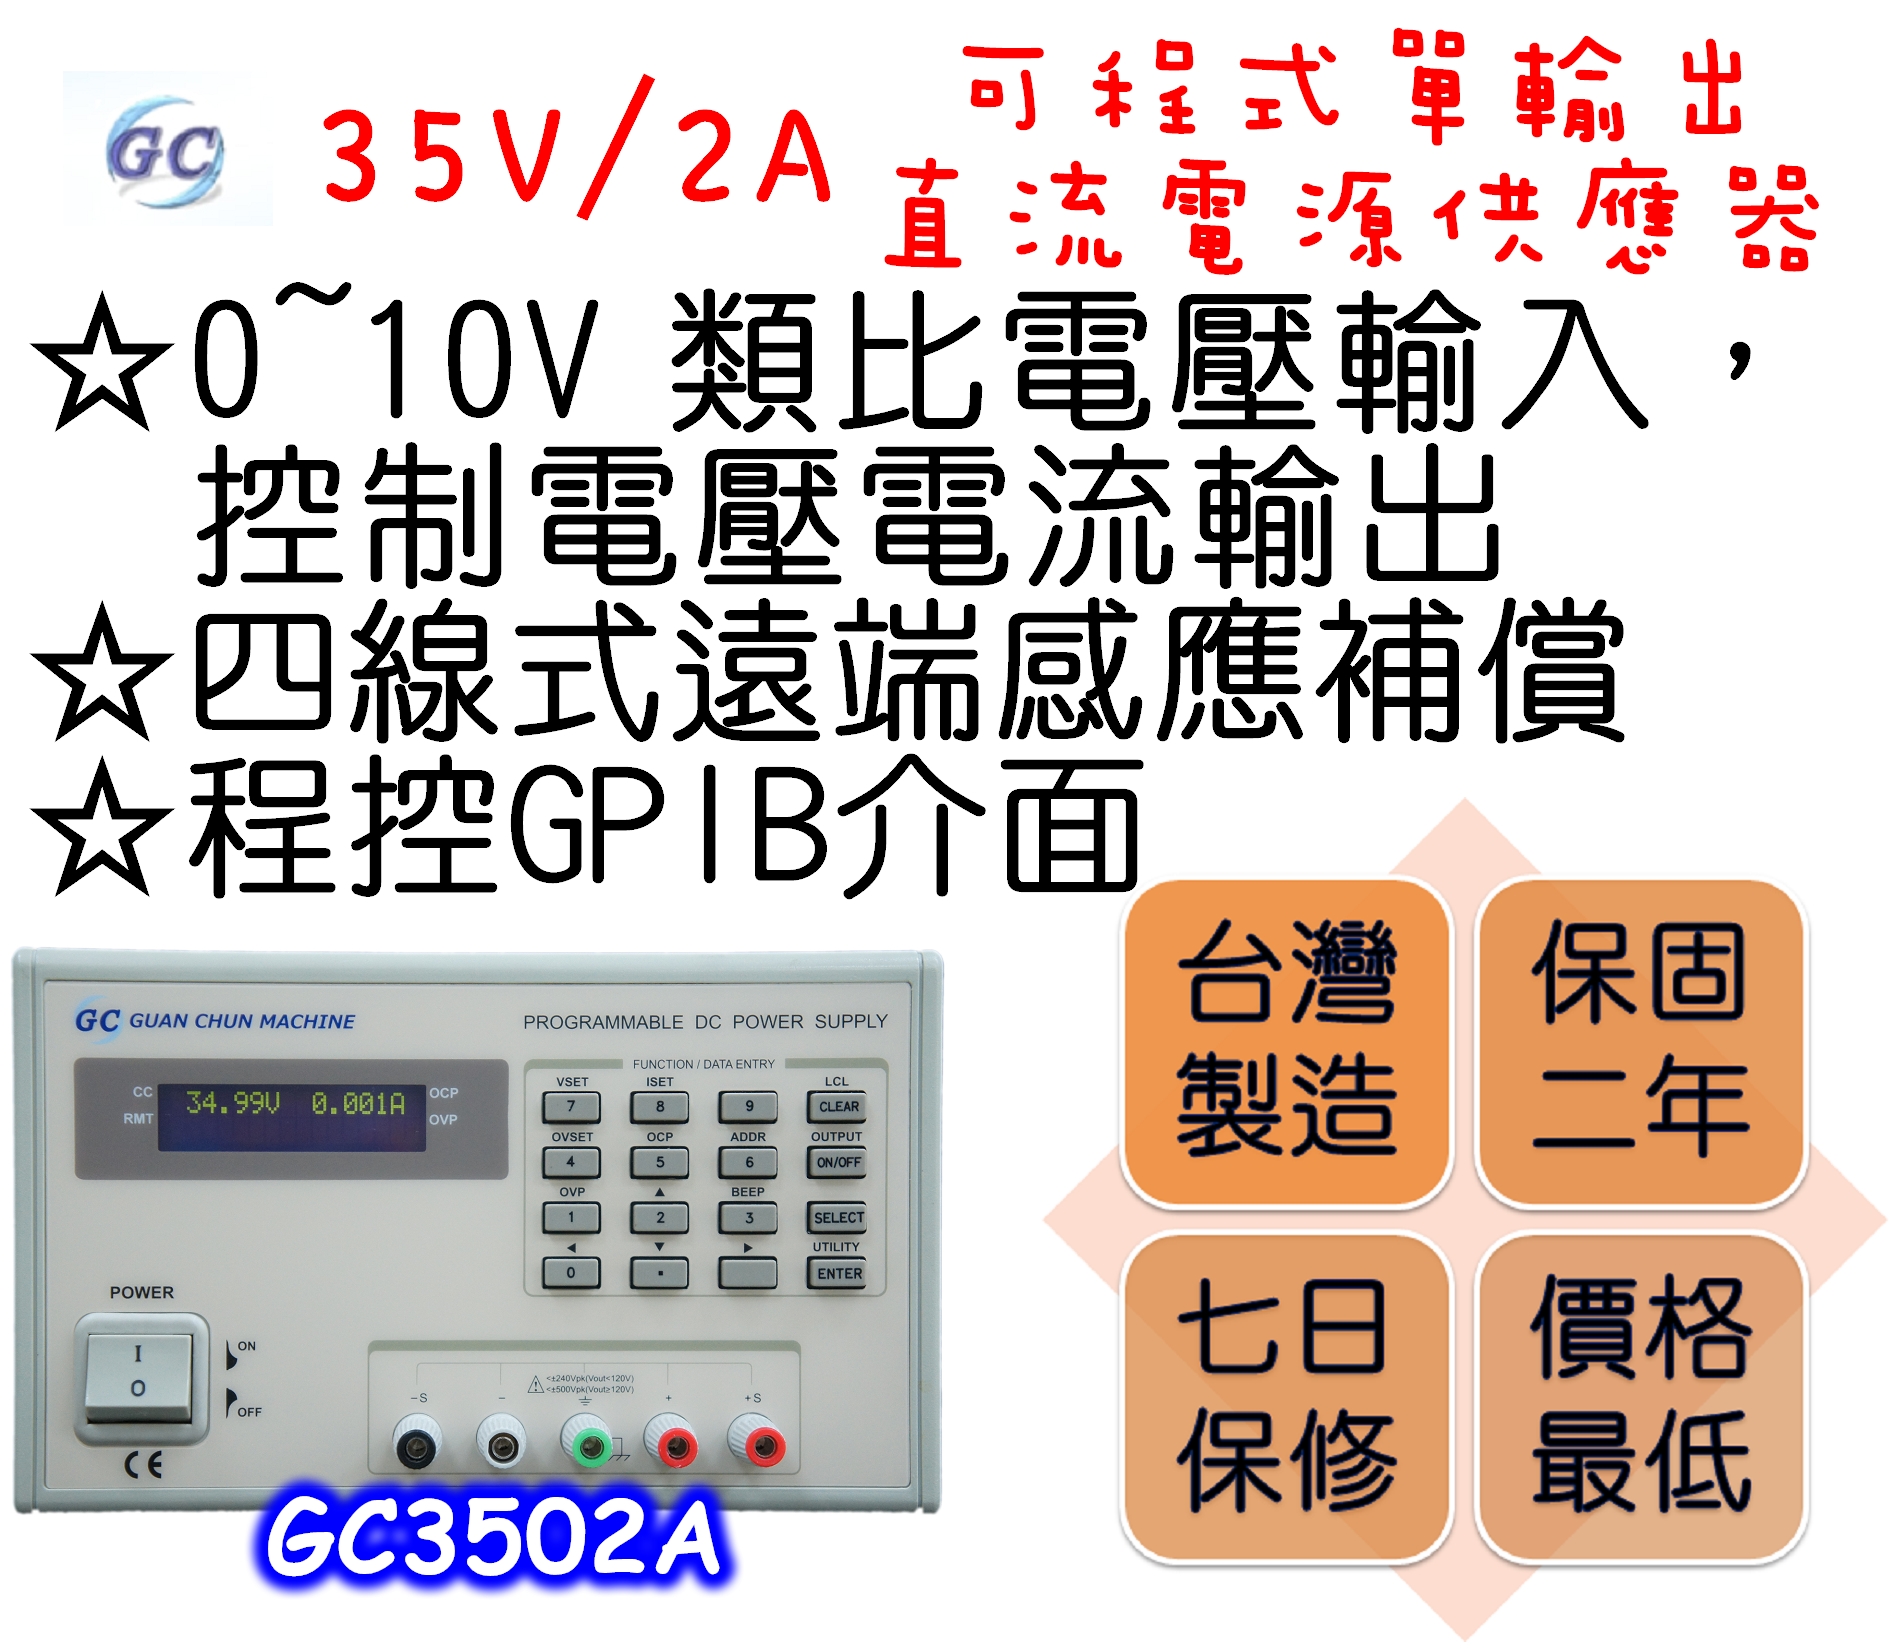  Constant voltage and constant current operation.
 Voltage overload OVP and current overload OCP protection.
 External voltage control operation (0~10V).
 Programmable GPIB interface.
 Panel calibratable design.
 Low ripple and noise output.
 Front and rear panel output terminals.